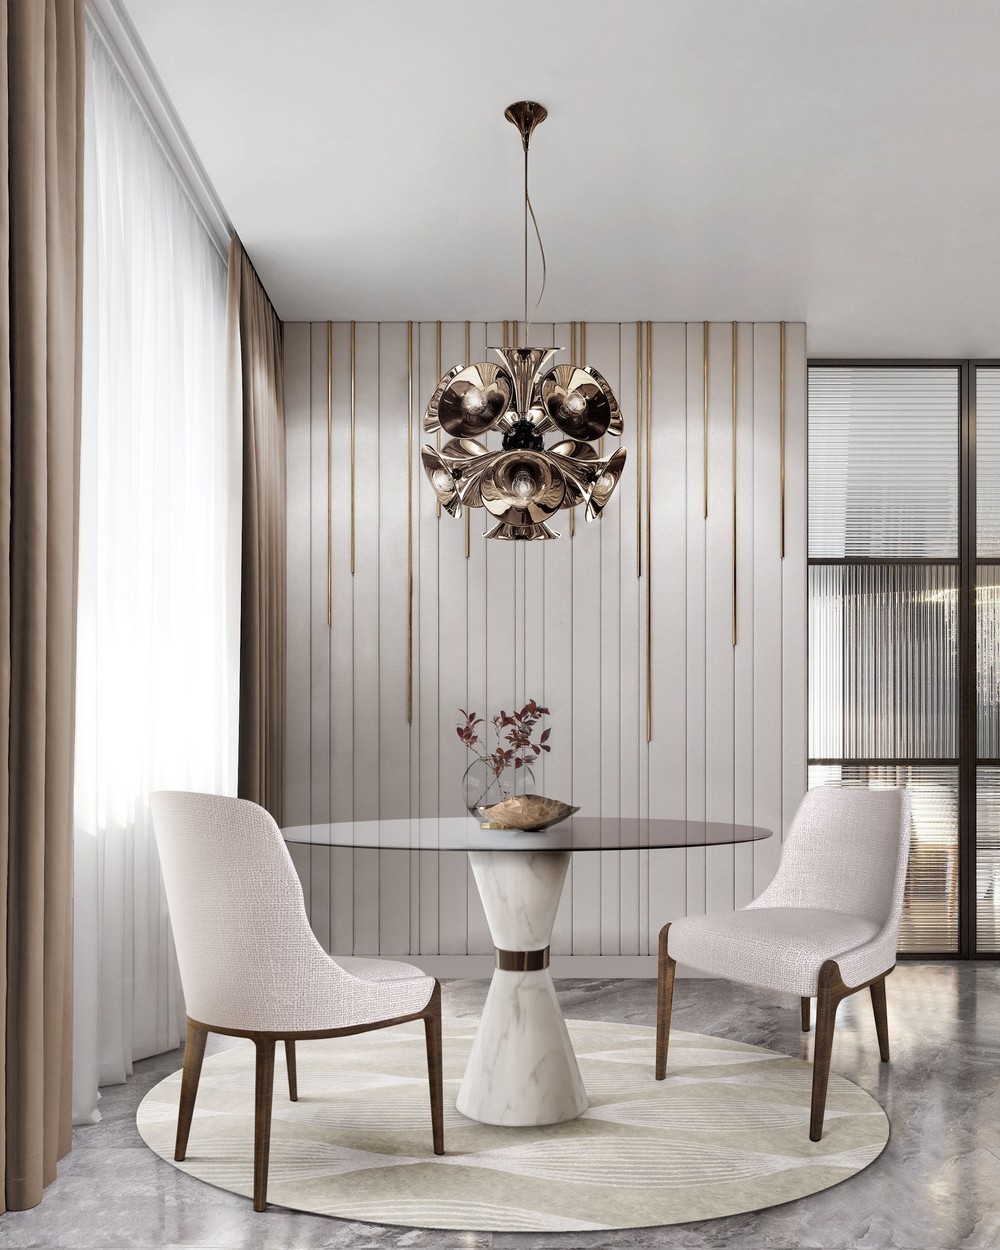 10 Inspirational Dining Room Ideas You Will Love